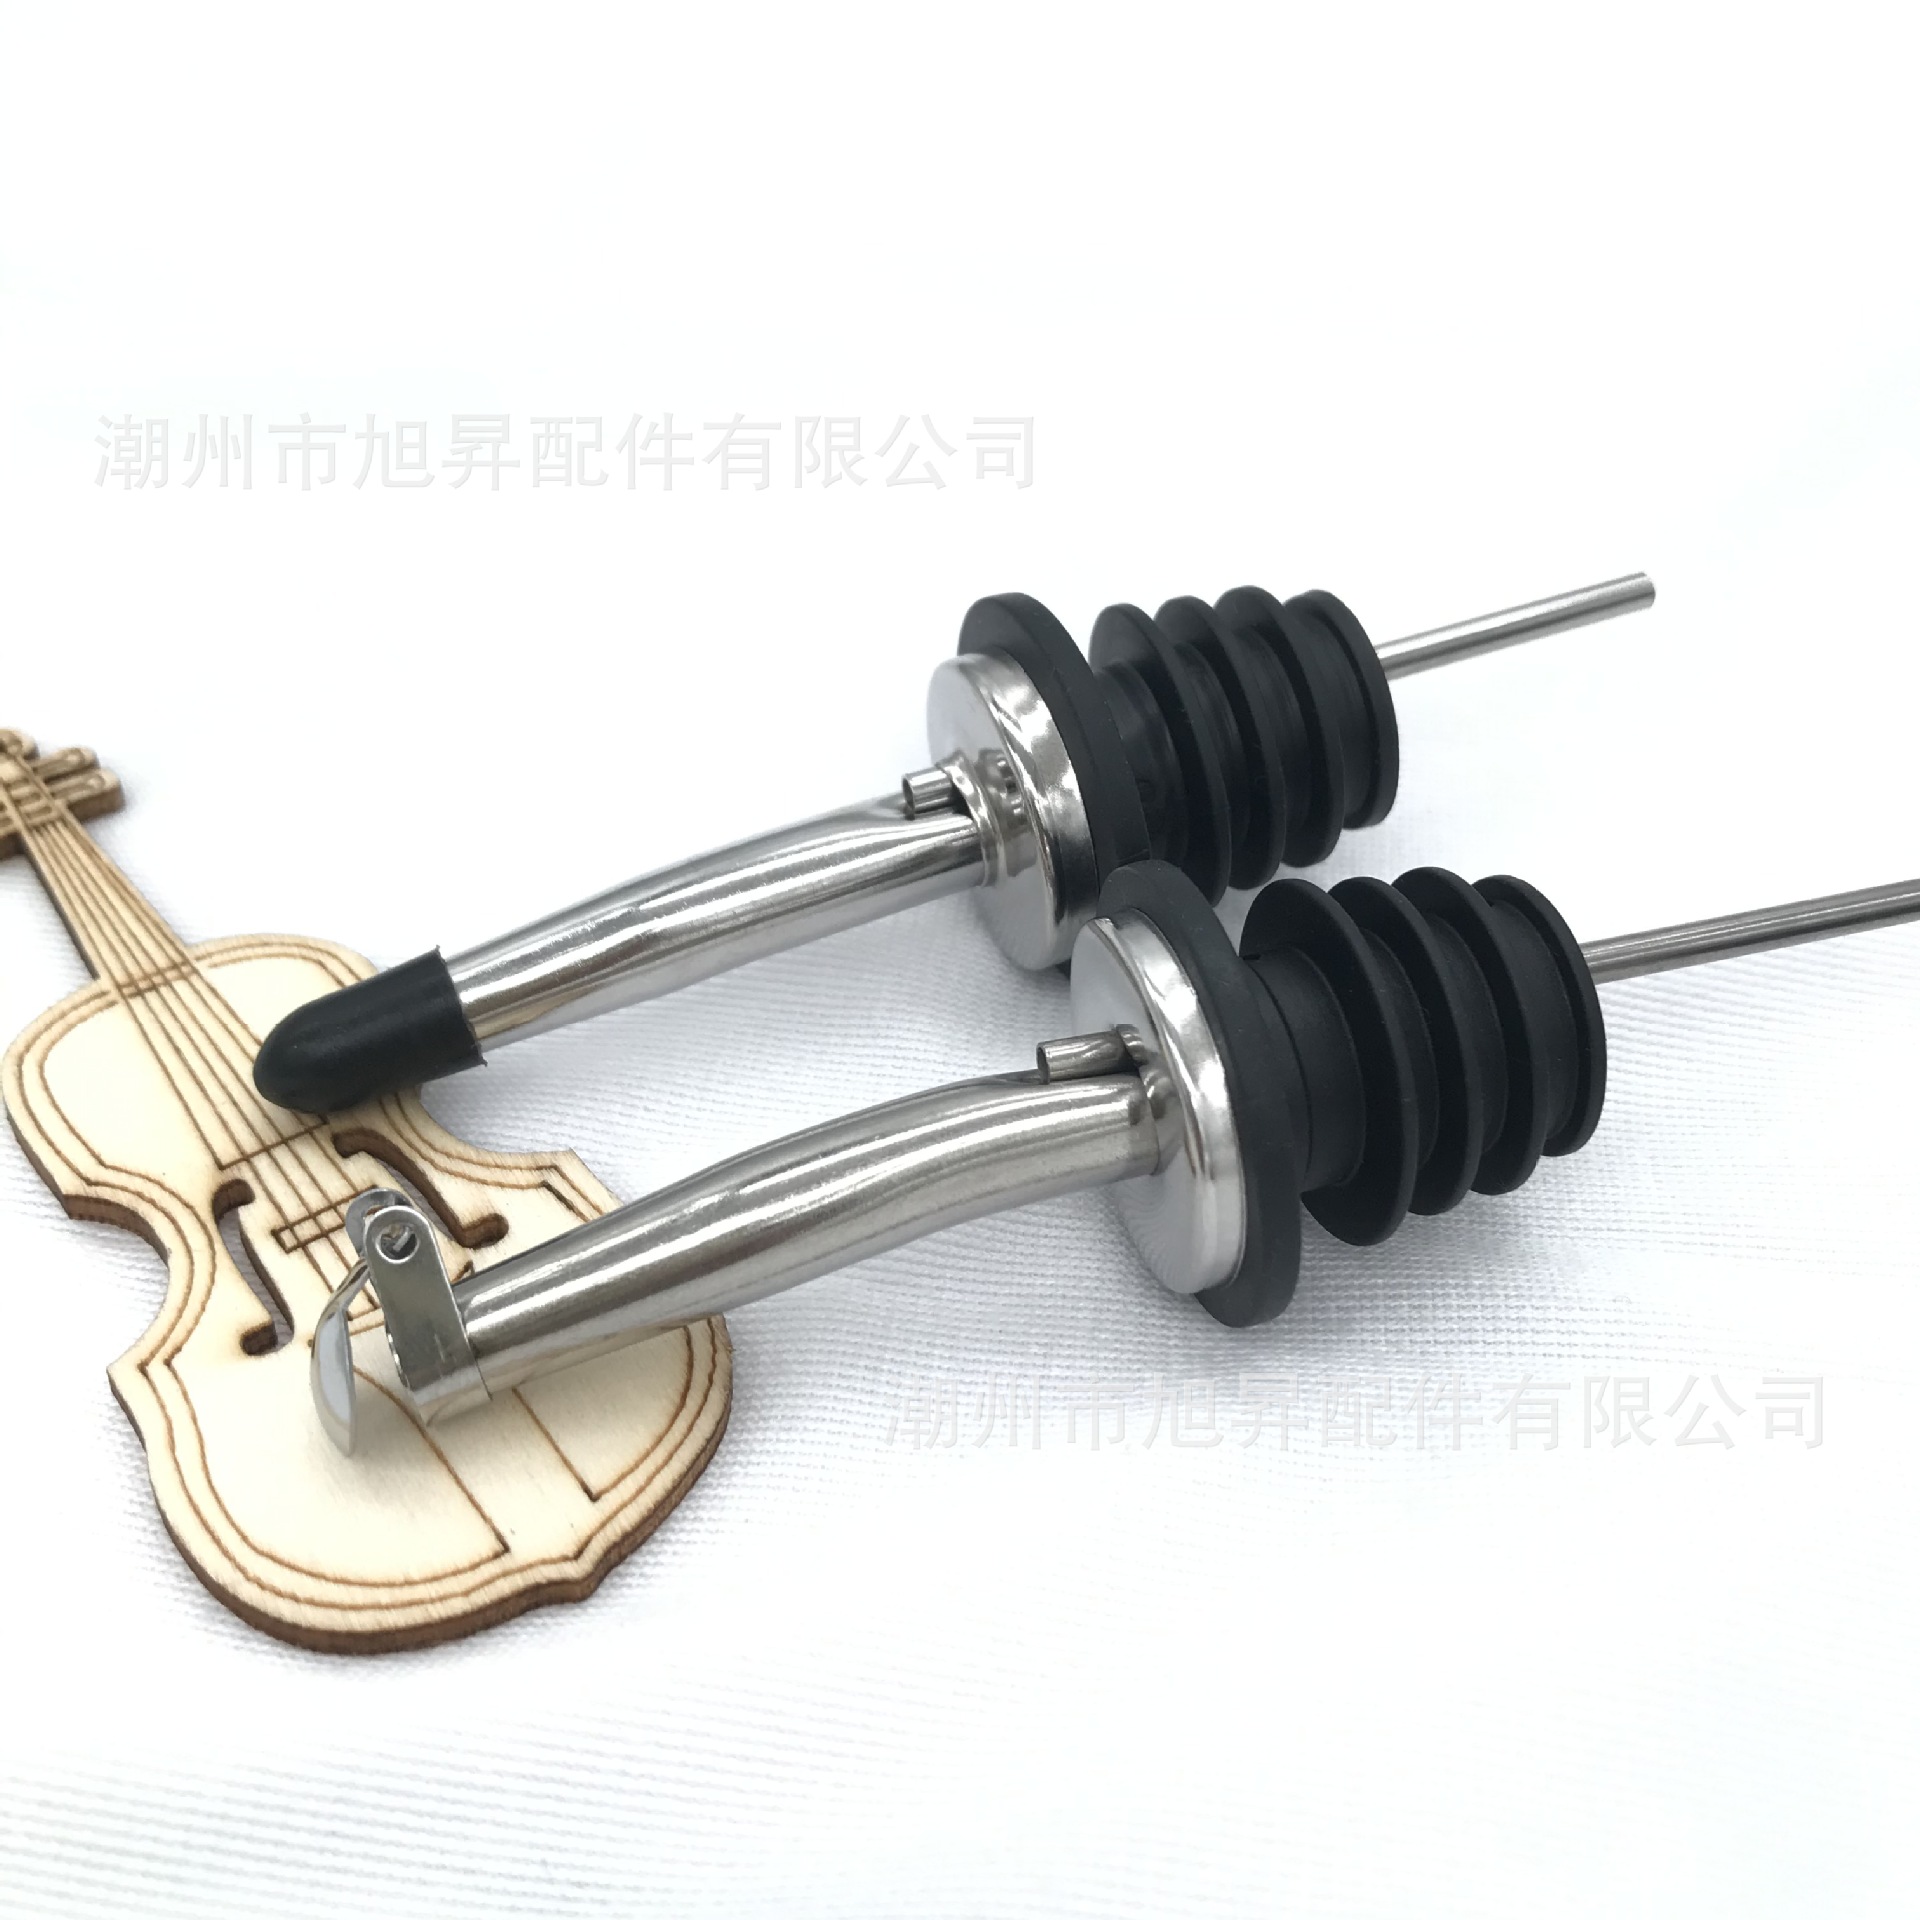 New Stainless Steel With Lid Wine Pourer Bar Wine Mouth Stainless Steel Bartender Wine Stopper Wine Pourer Automatic Cover